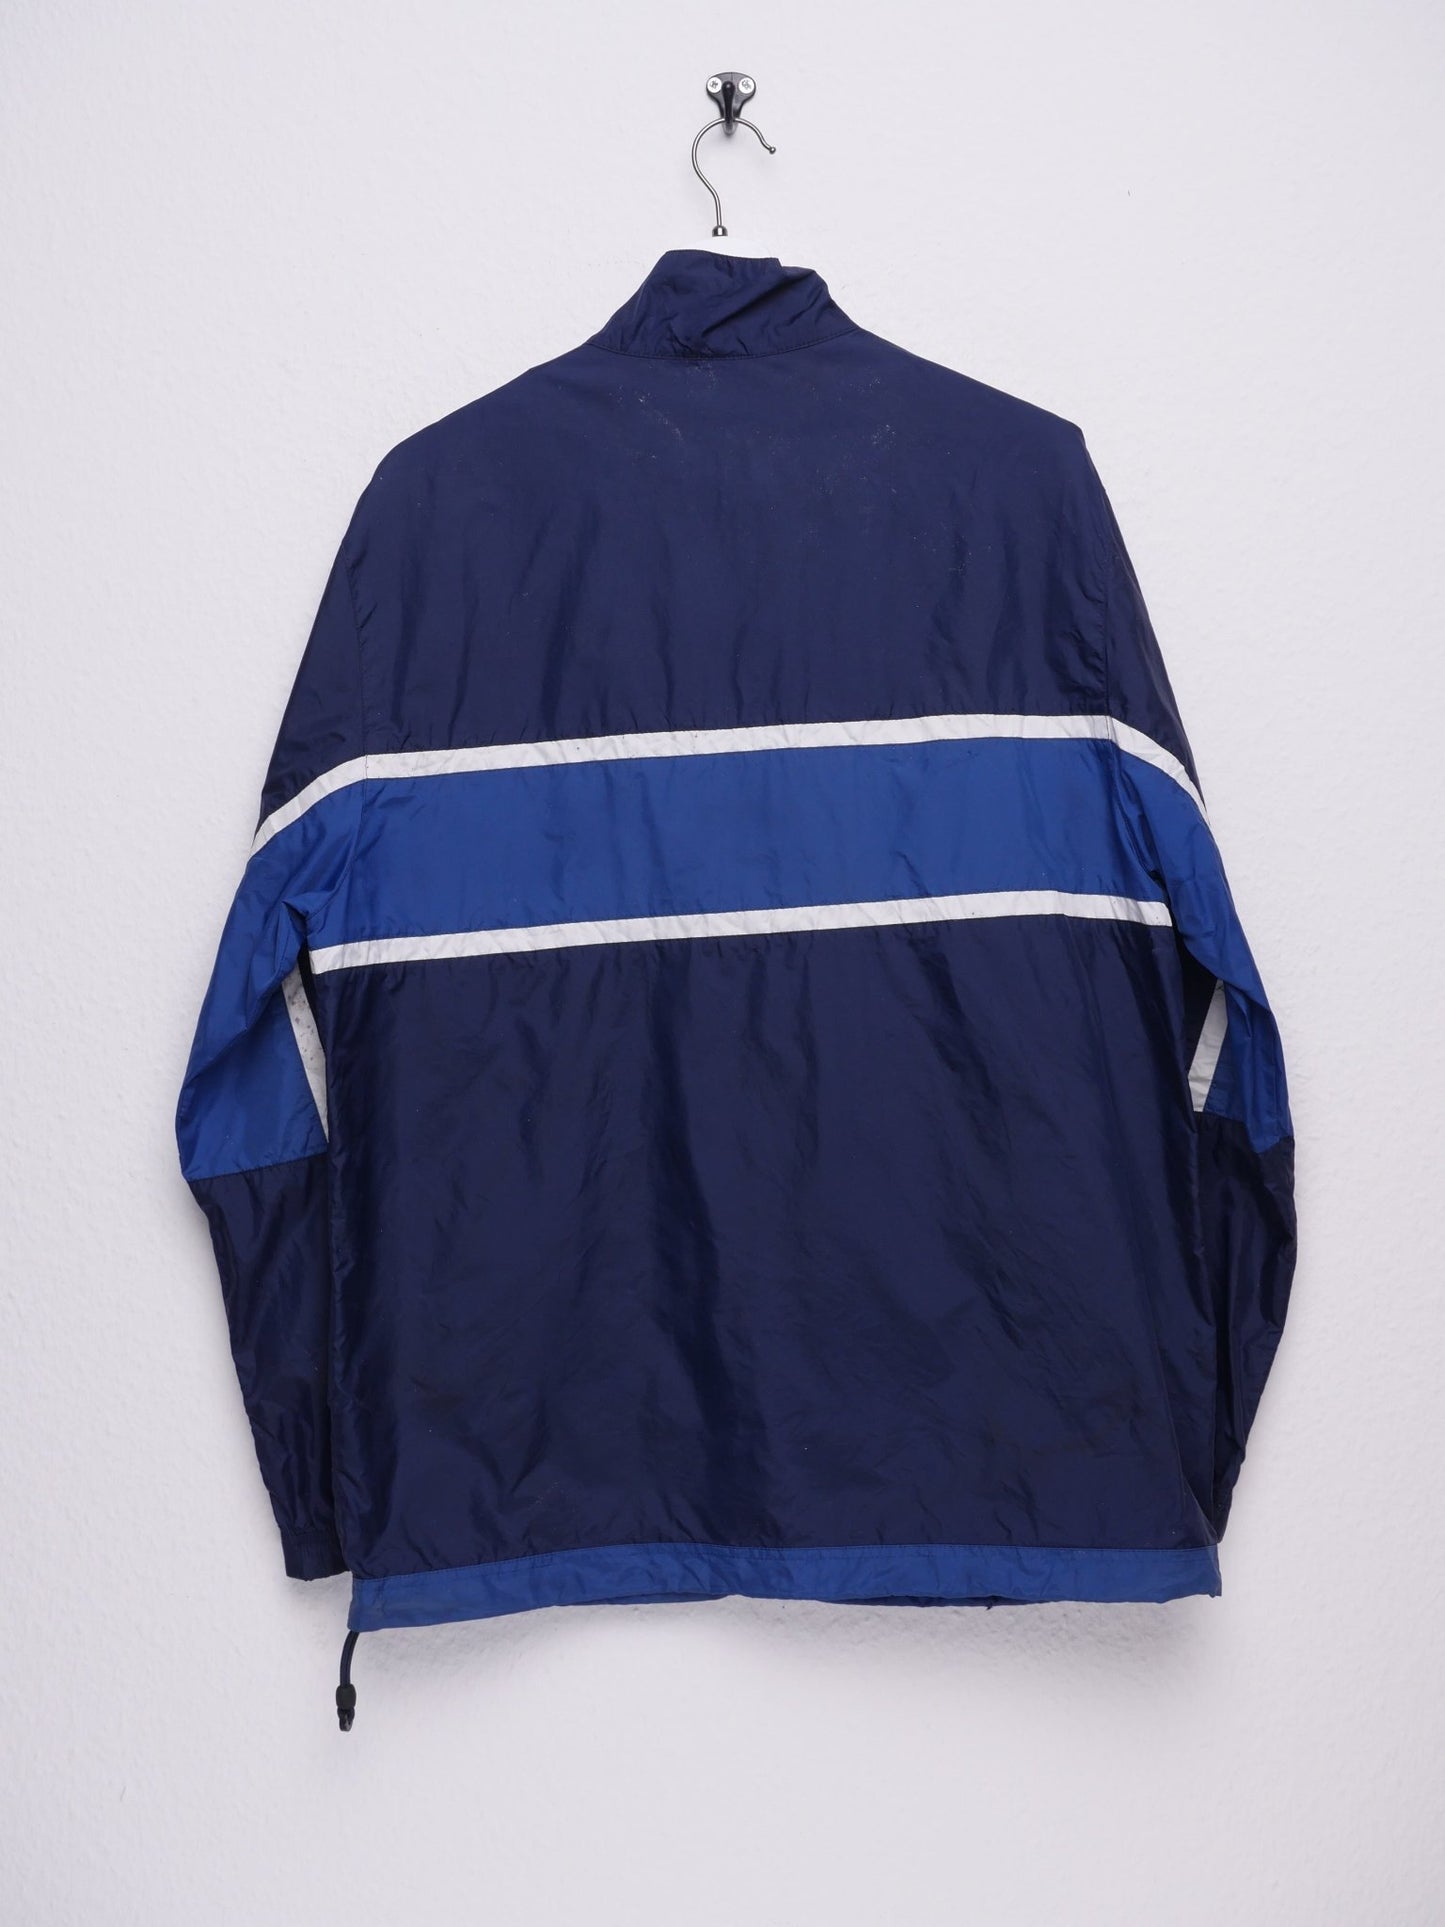 Nike embroidered Logo two toned Vintage Track Jacket - Peeces